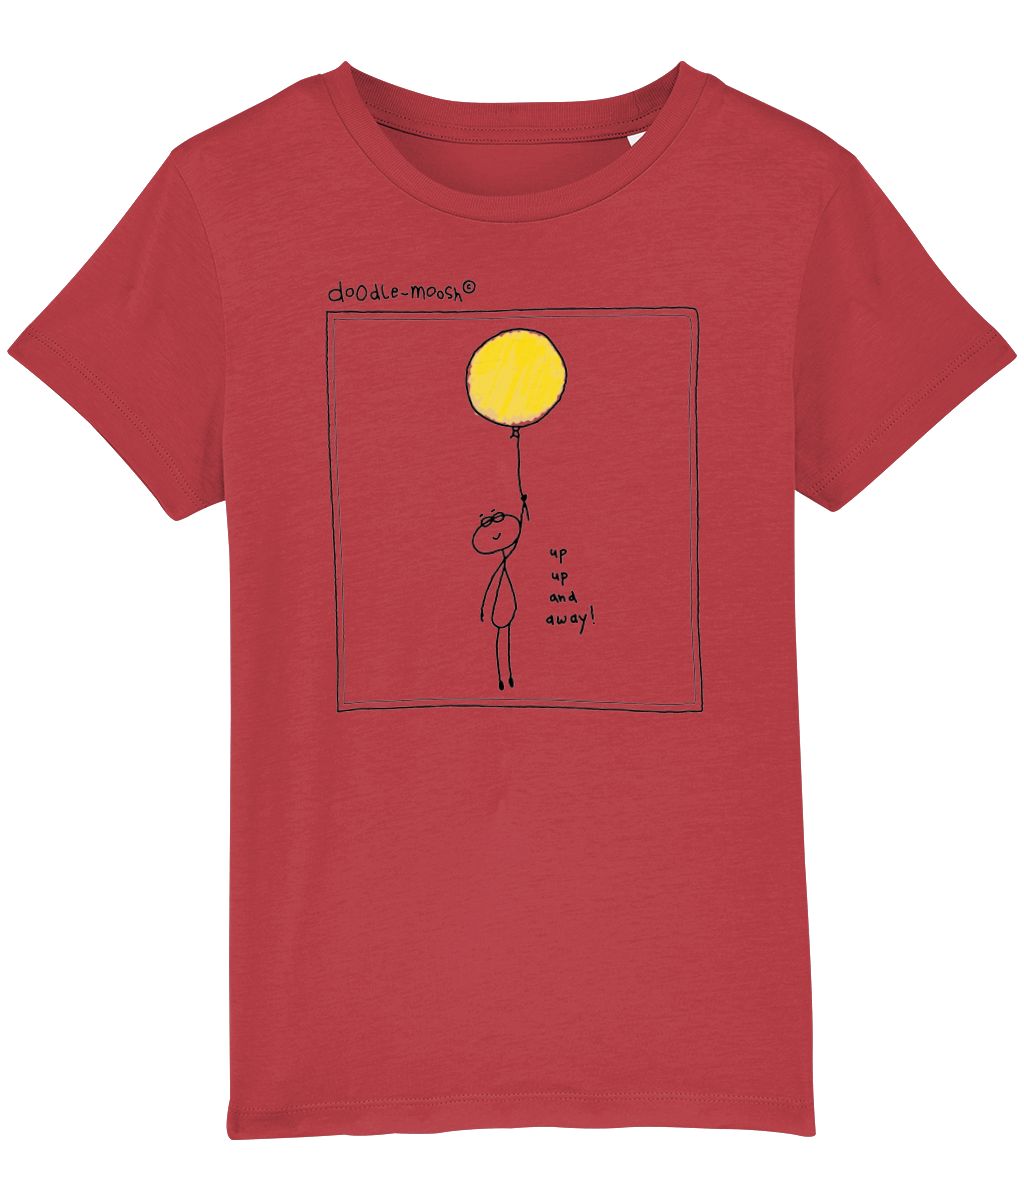 Up up and away t-shirt, red with black, colourful drawing